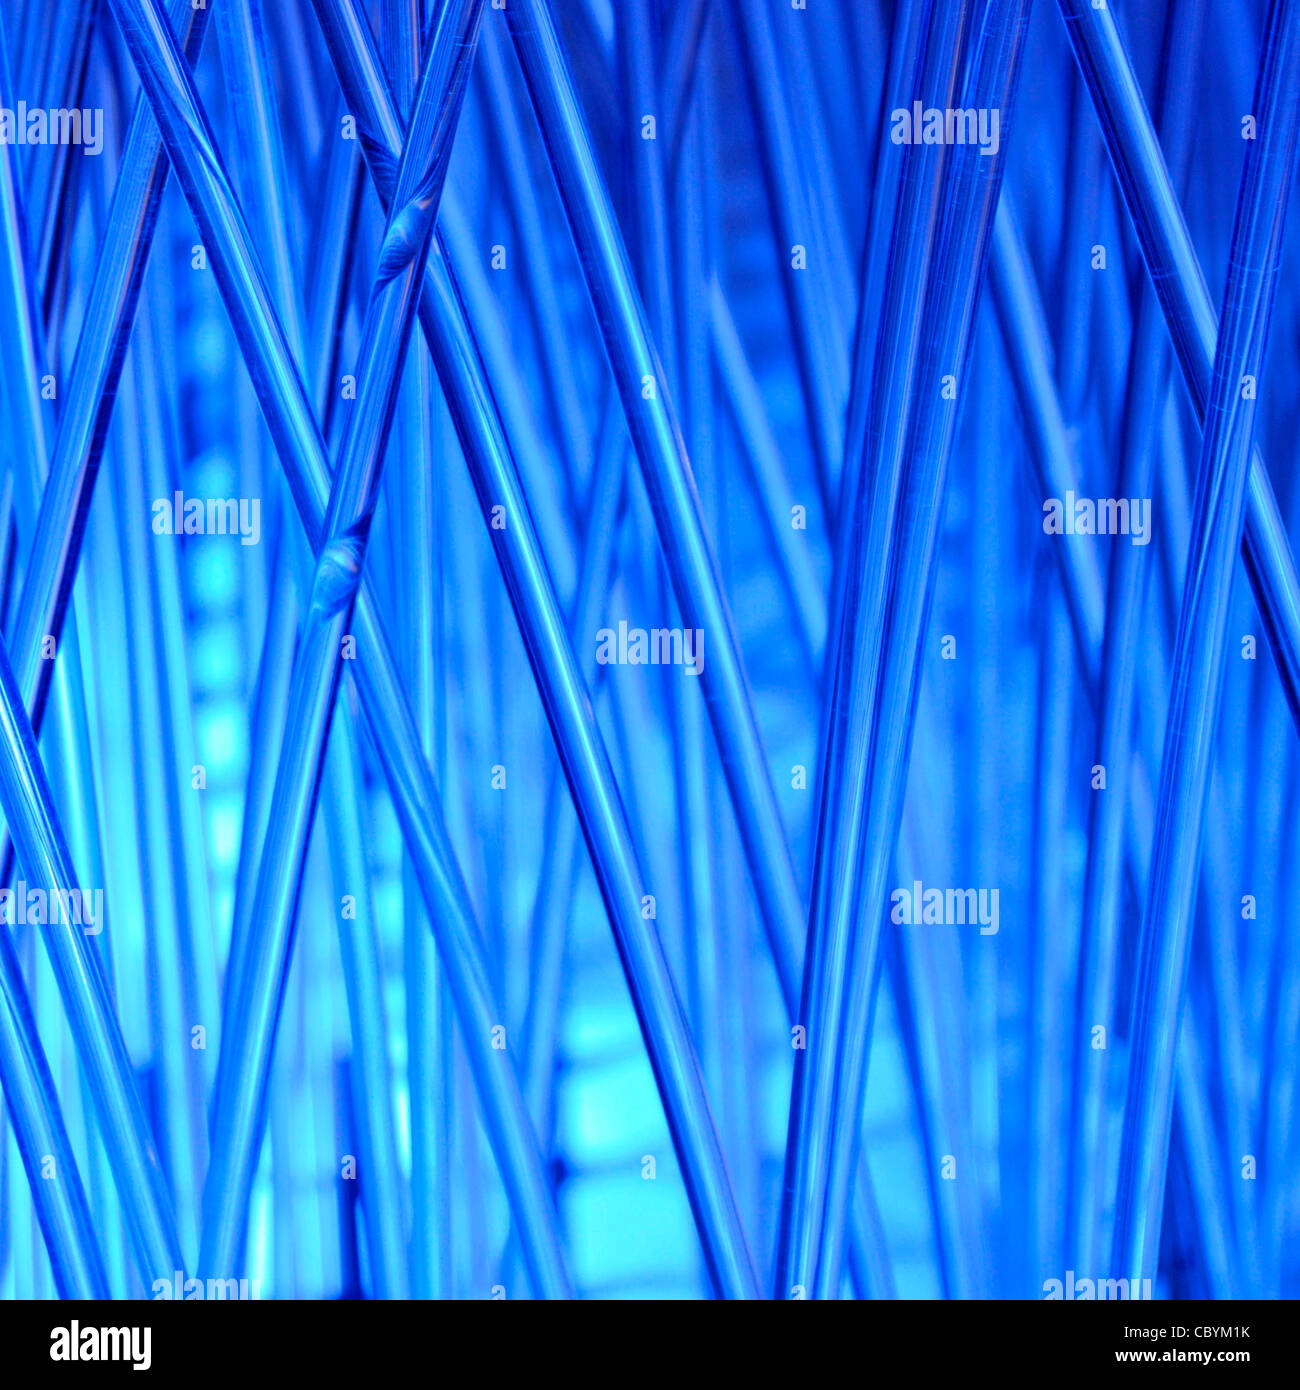 Blue abstract background of a blue lighting display applied to leaning rods & bars in random irregular crisscross pattern replicating technology theme Stock Photo